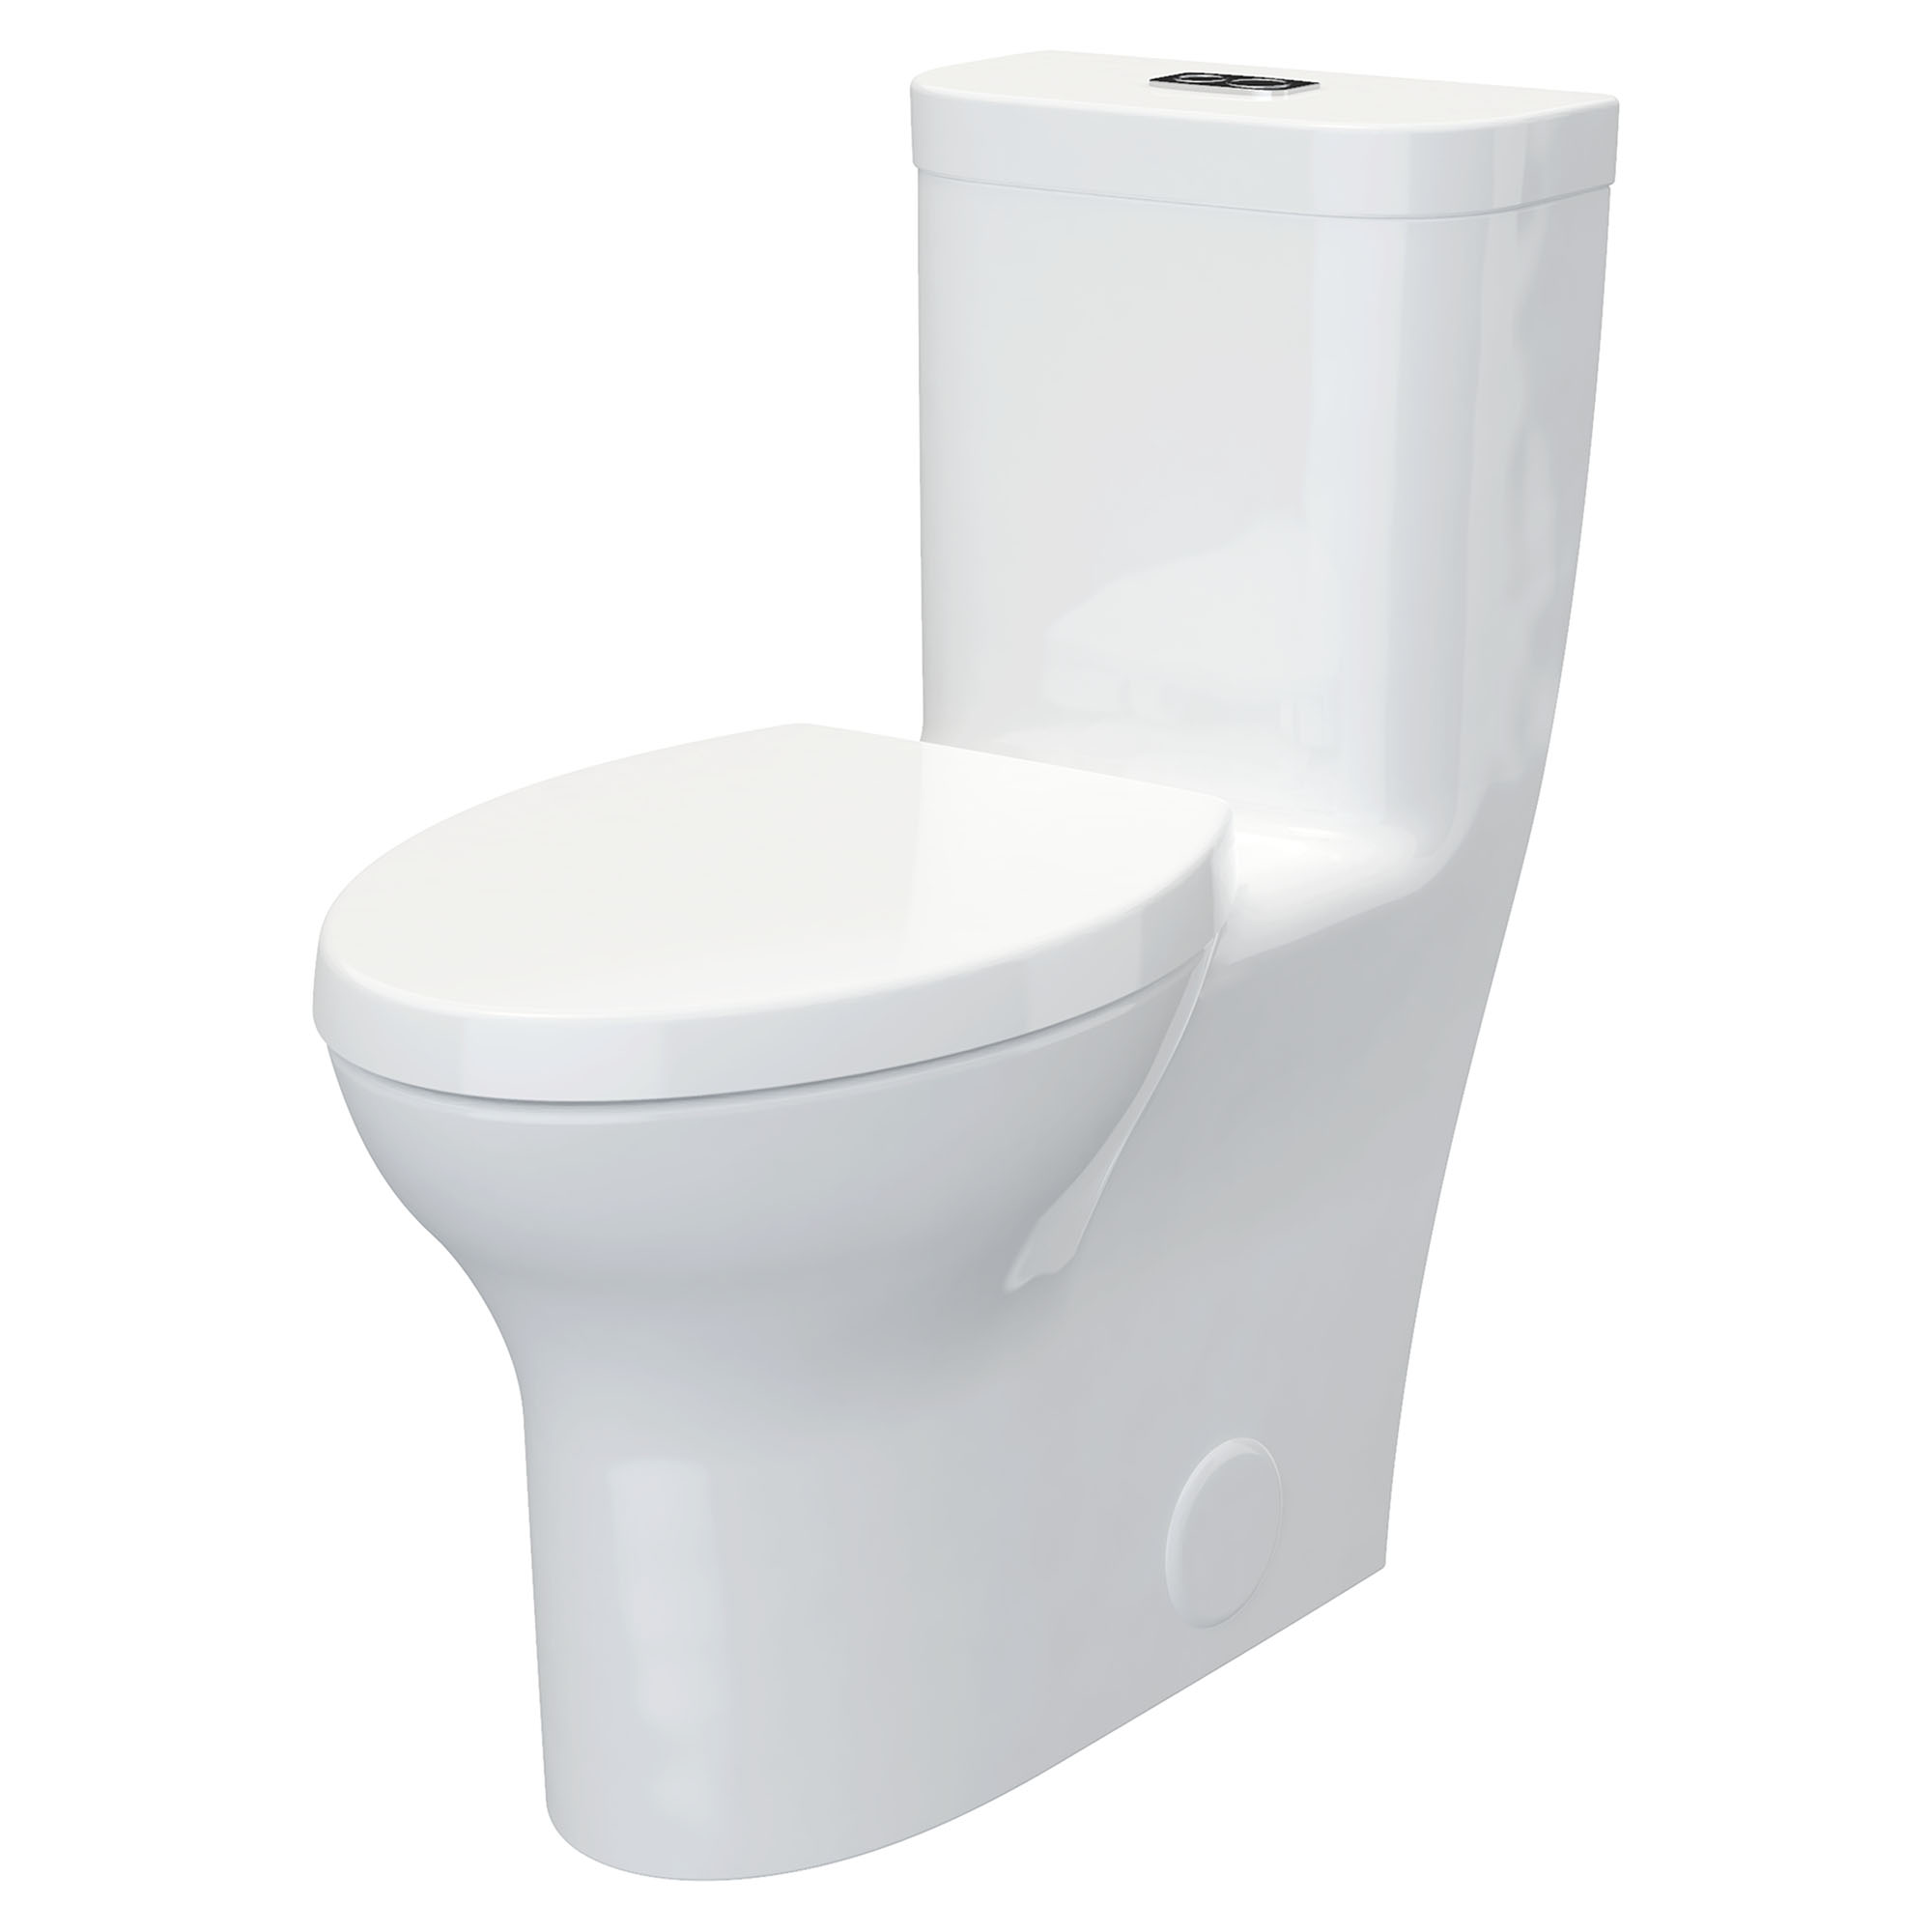 Equility One-Piece Dual Flush Chair Height Elongated Toilet with Seat